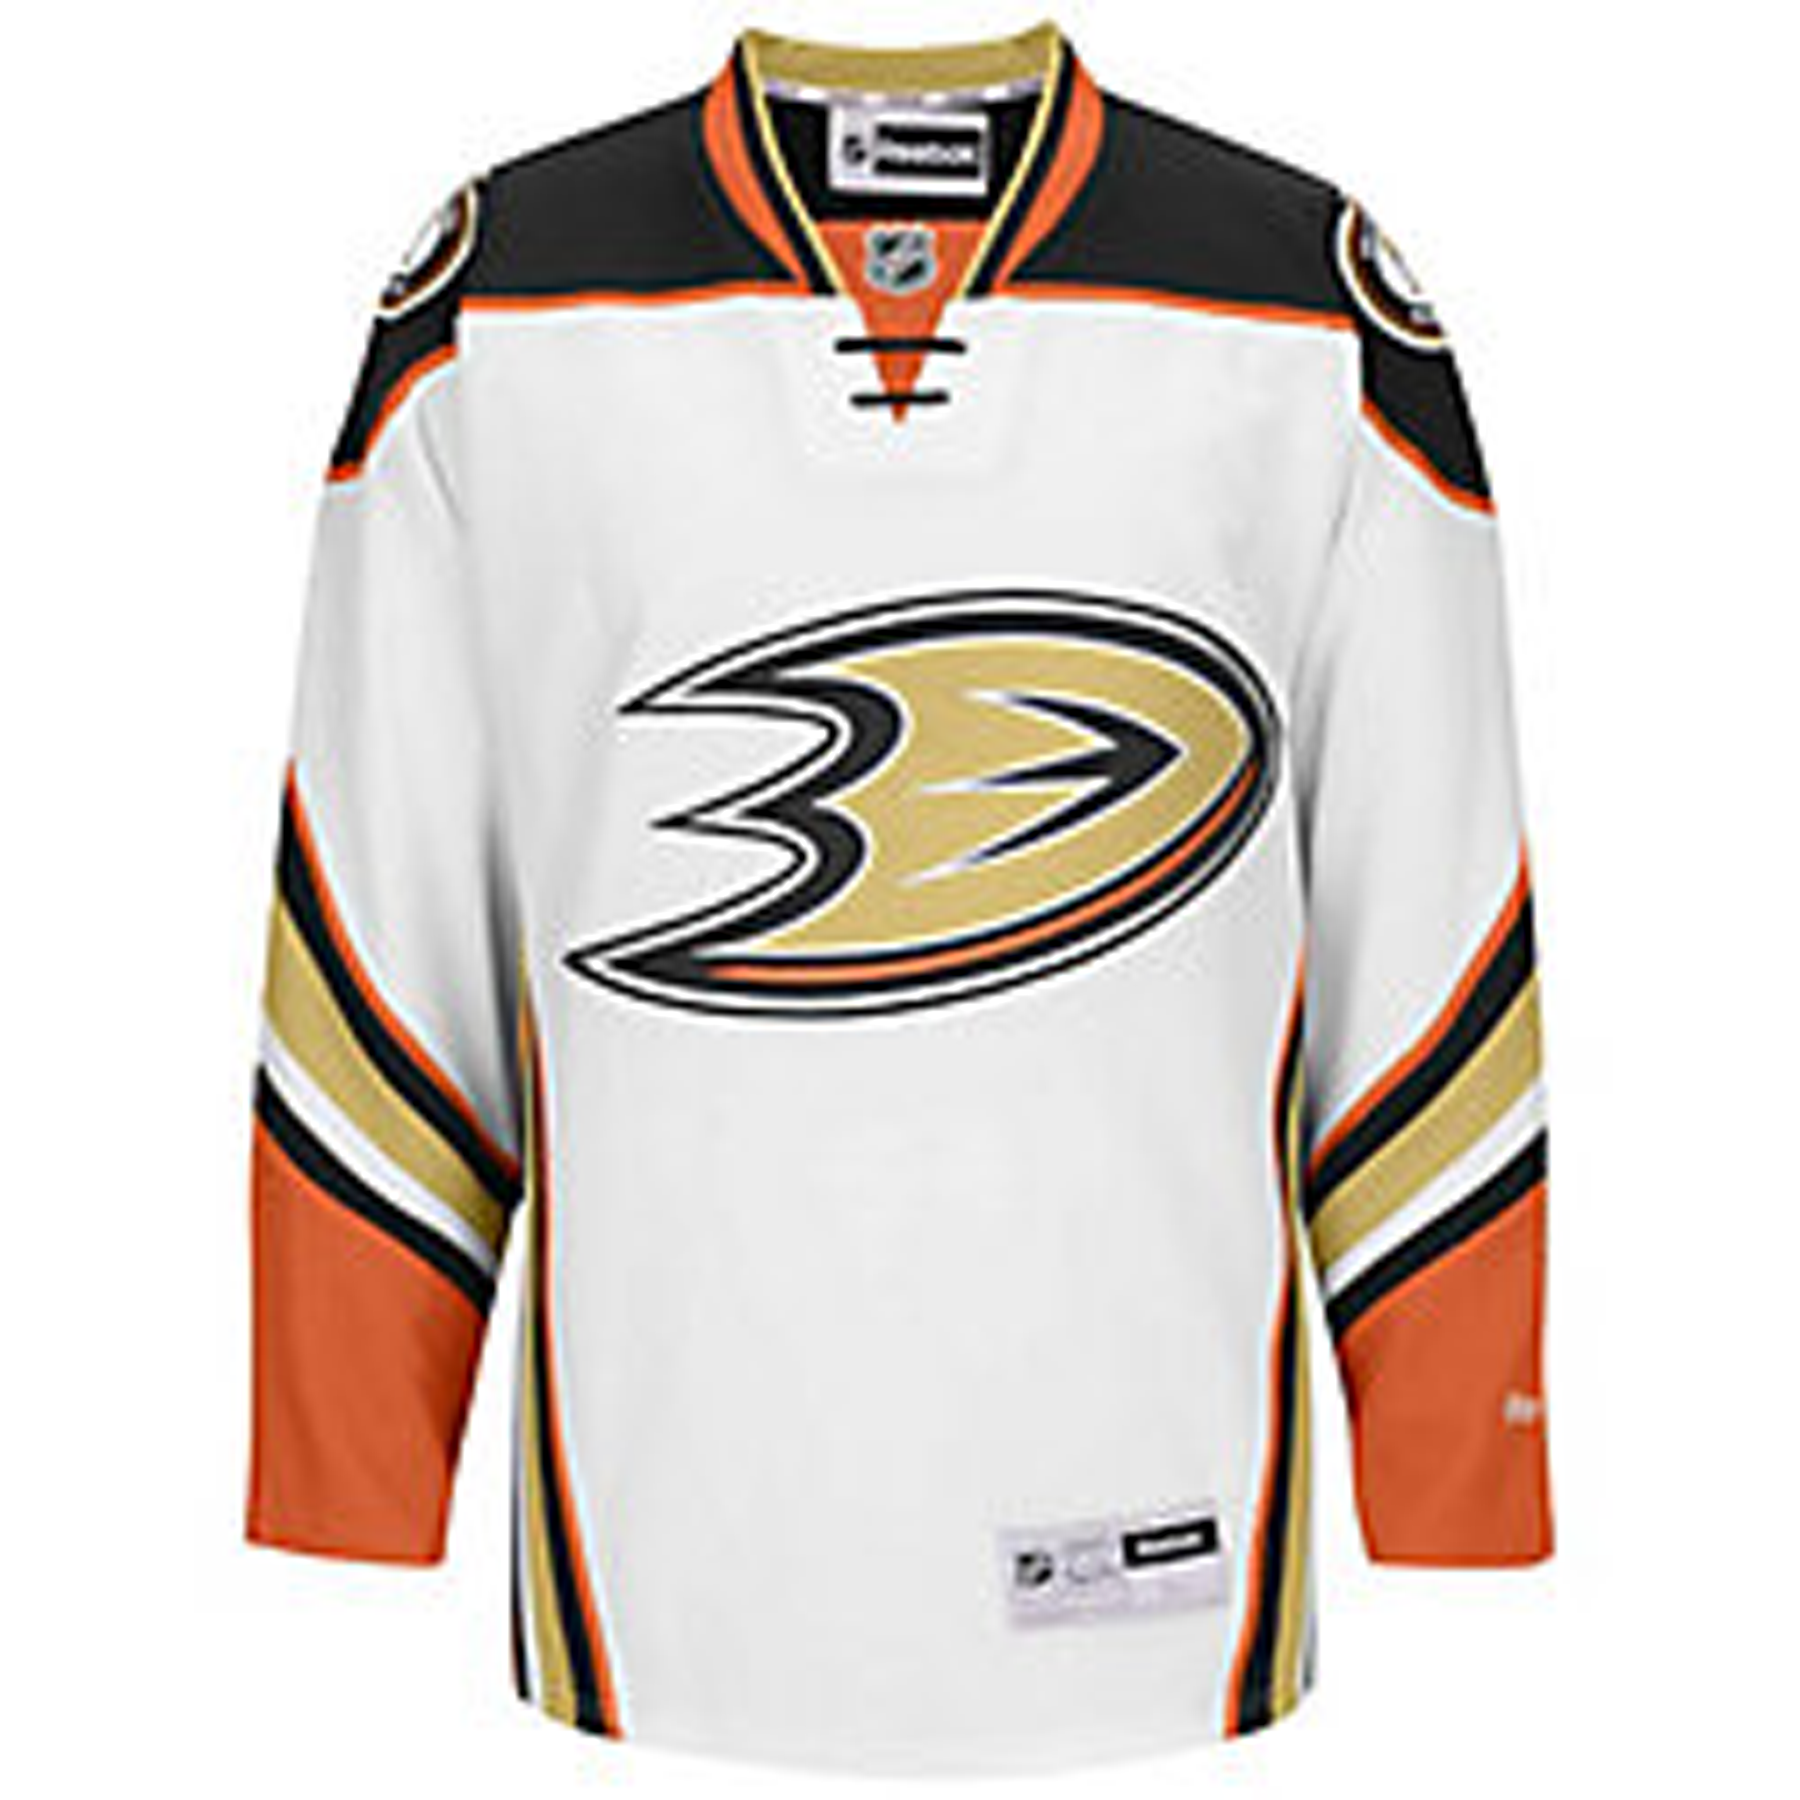 Anaheim Ducks Custom Letter and Number Kits for Alternate Jersey Material  Twill [Twill-Hockey-AND-A-02] - $19.49 